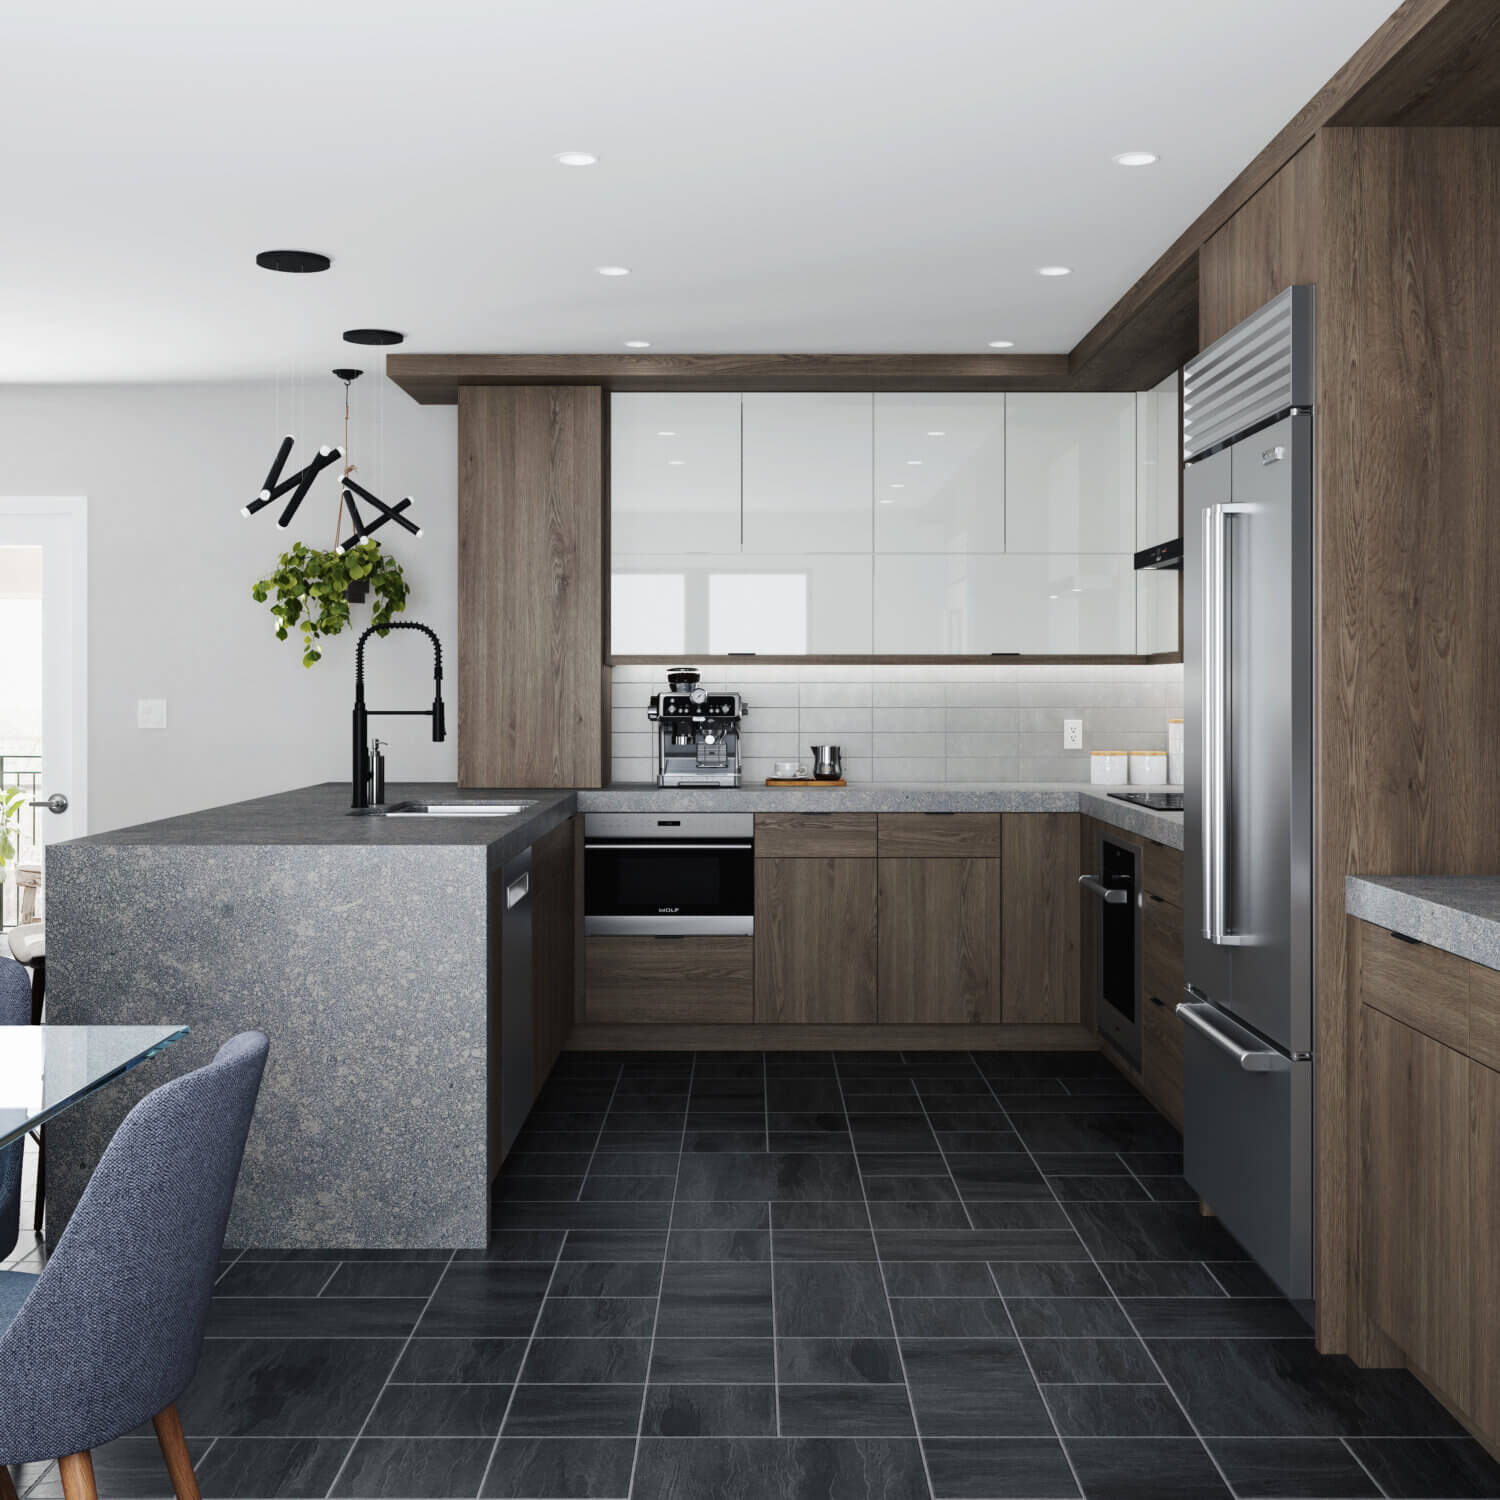 A contemporary kitchen design with dark stained slab cabinets and light gray acrylic cabinets as accents.